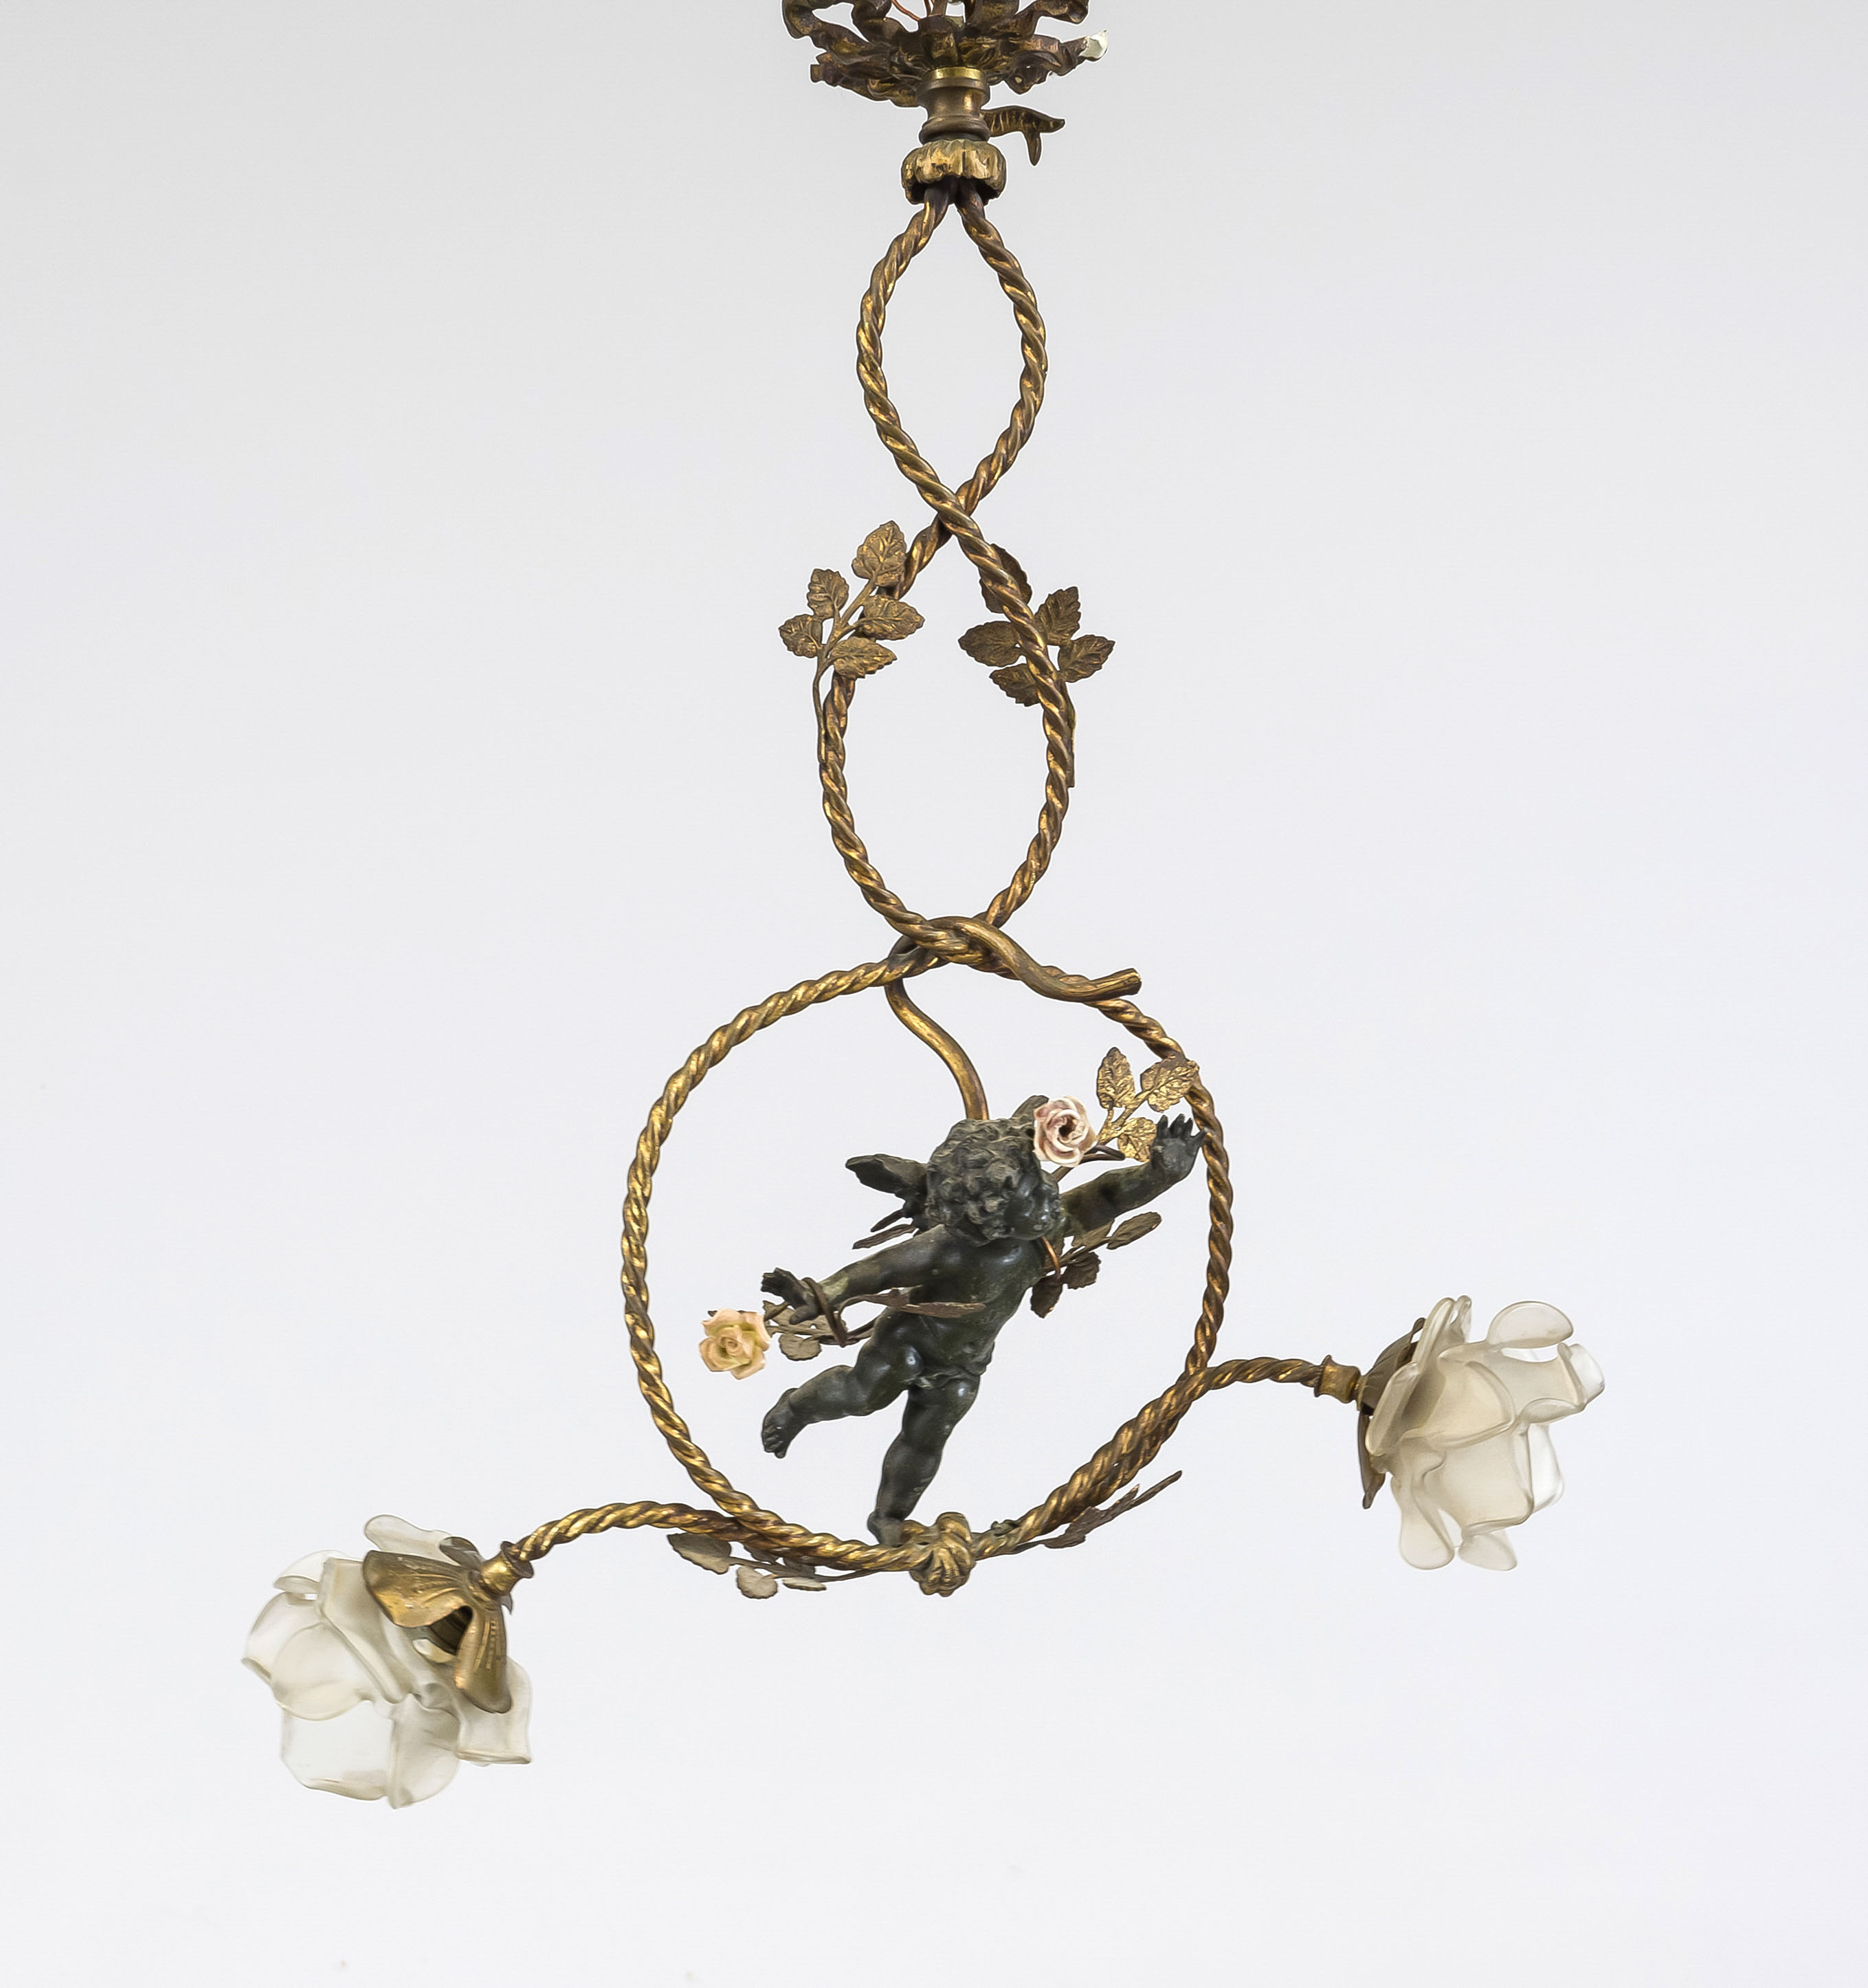 Ceiling lamp, late 19th century, floating putto surrounded by shrubs and leaves, 2 shades in the